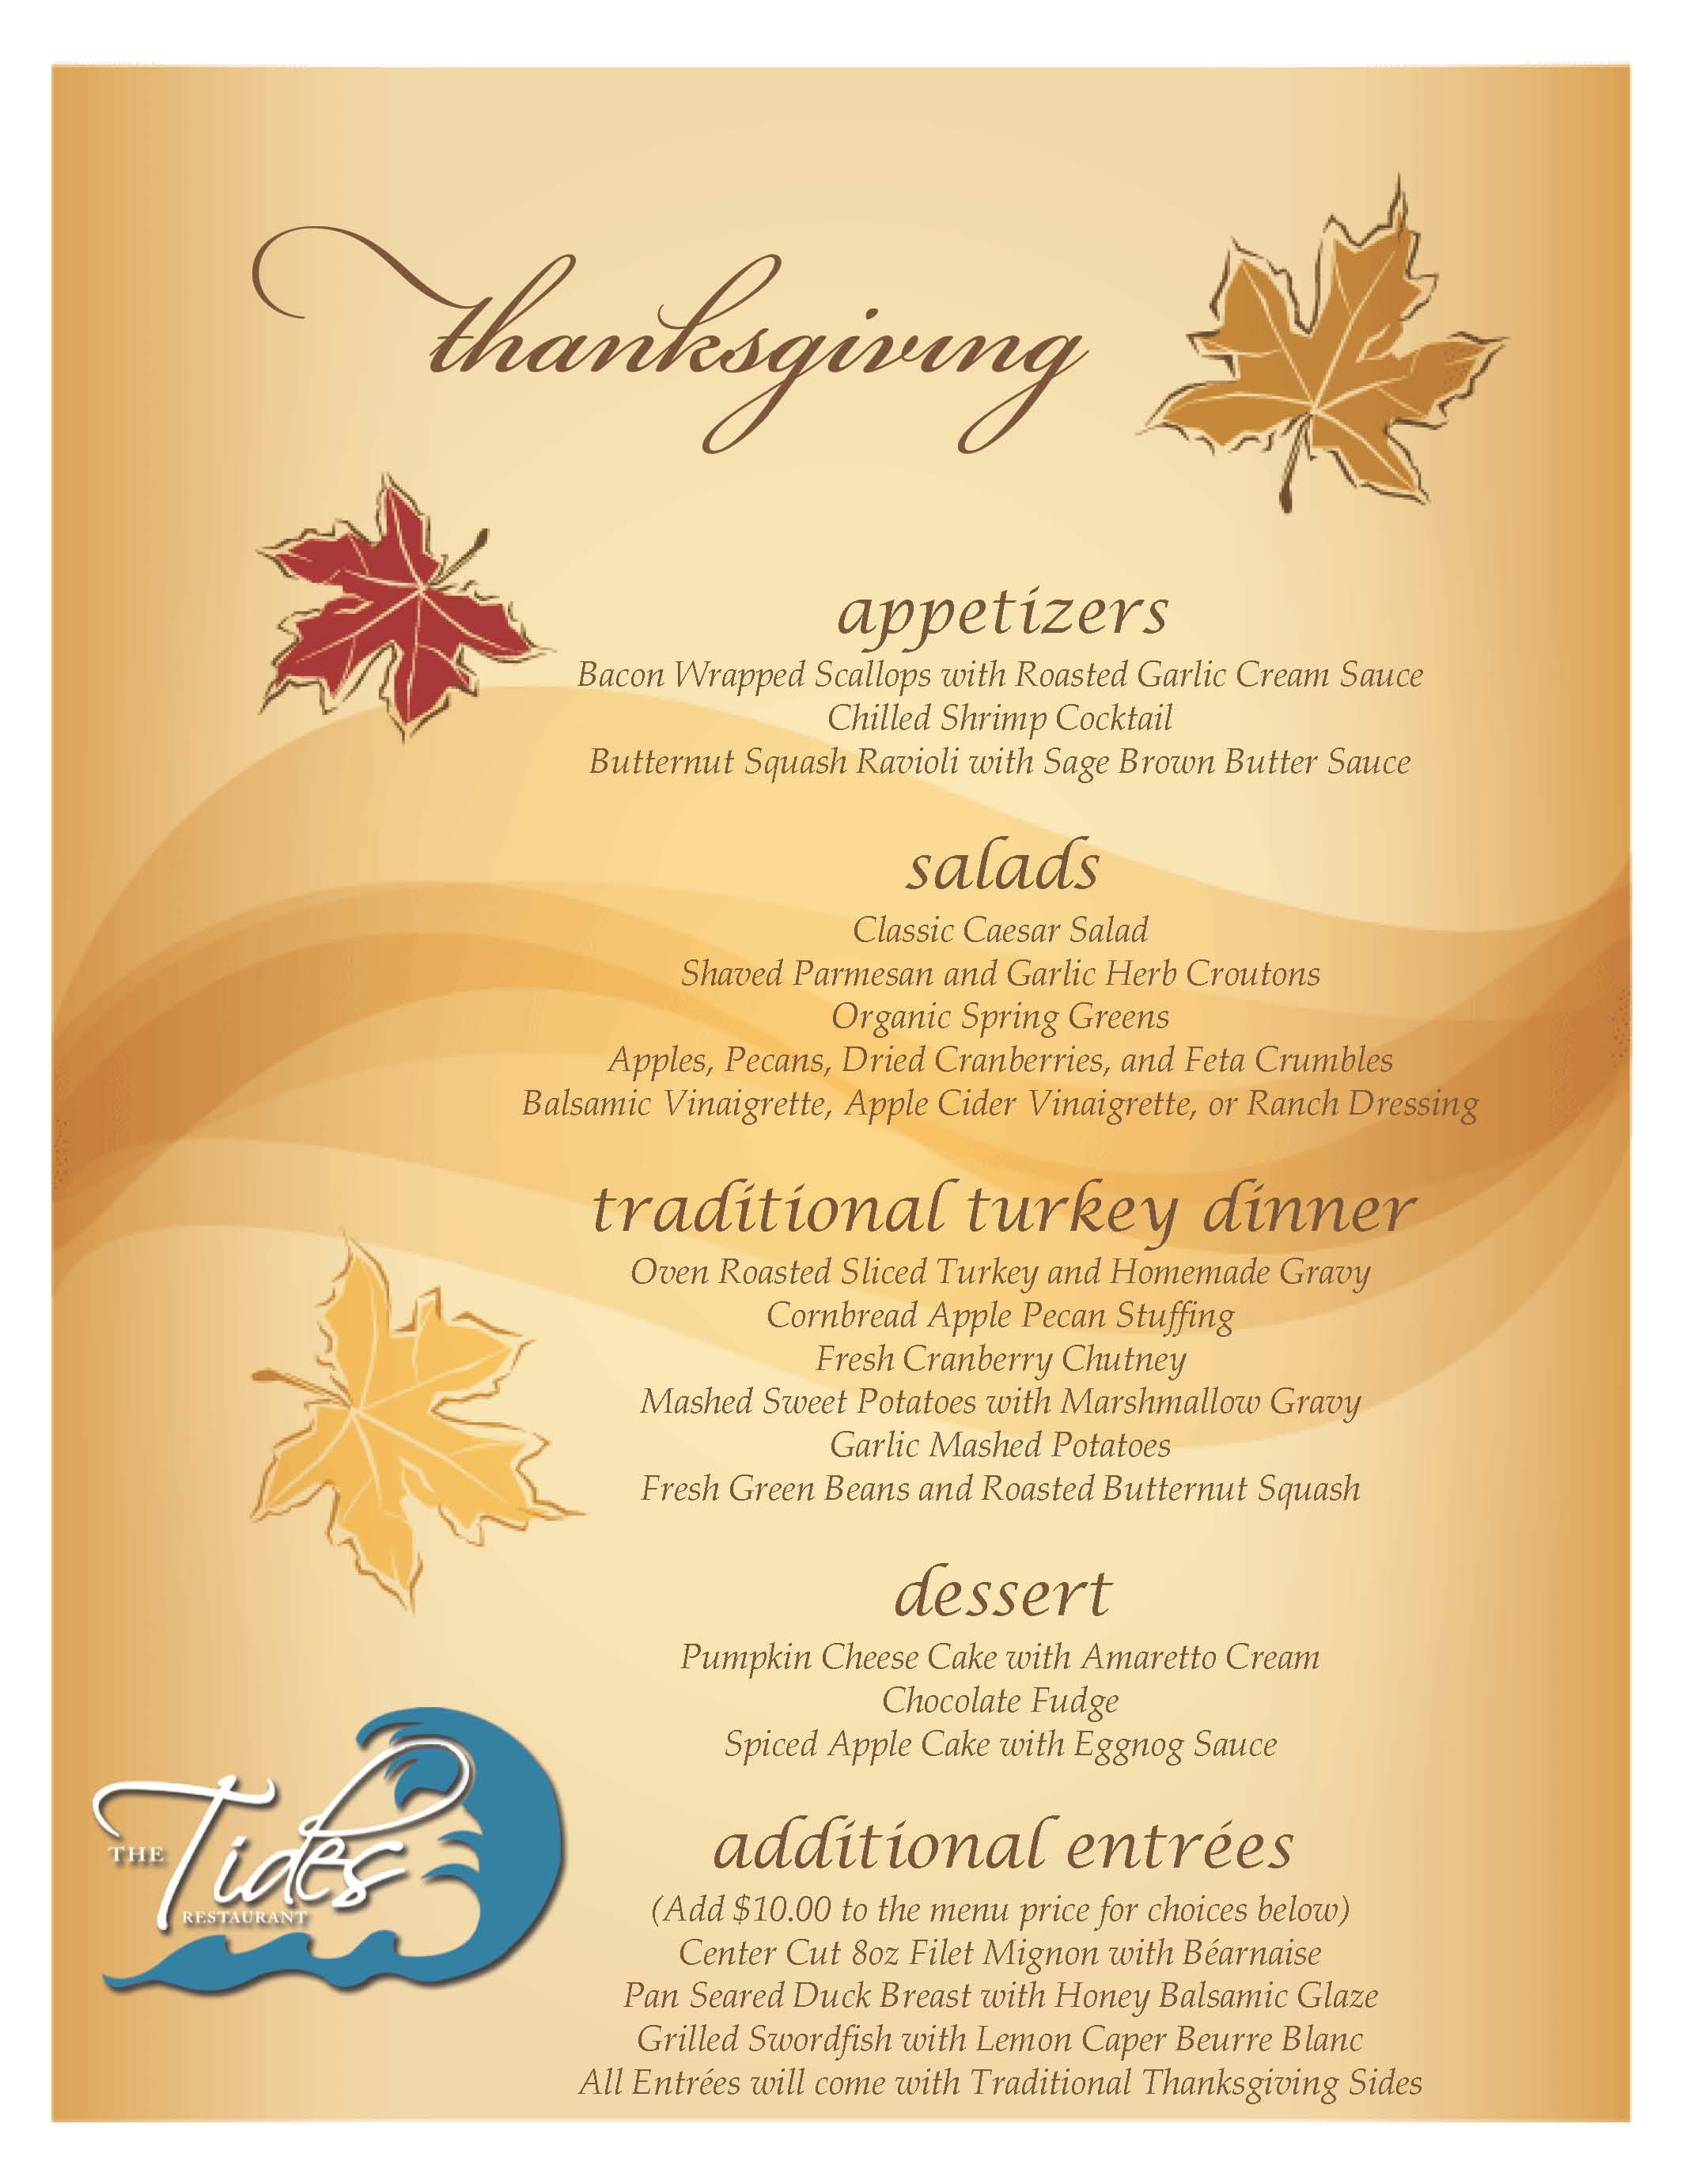 Thanksgiving Dinner Menu
 There Is an Alternative to Cooking Thanksgiving Dinner